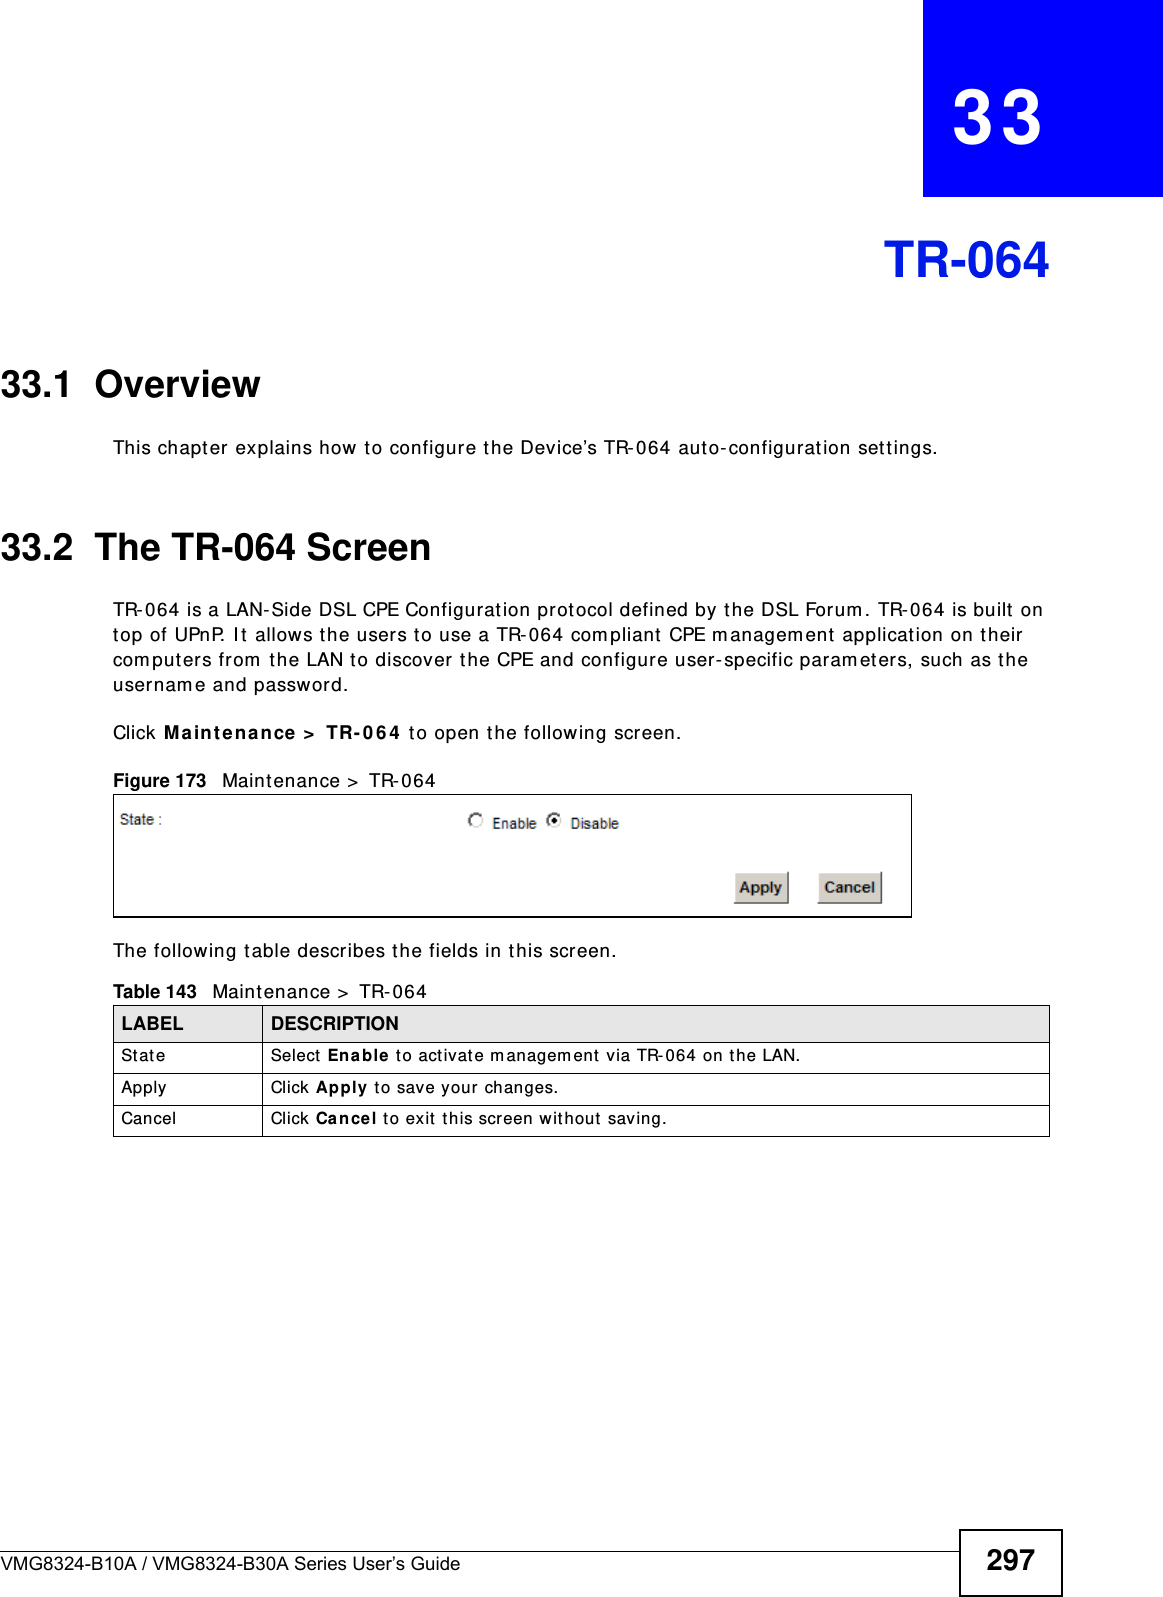 VMG8324-B10A / VMG8324-B30A Series User’s Guide 297CHAPTER   33TR-06433.1  OverviewThis chapt er explains how to configure t he Device’s TR- 064 aut o-configurat ion set tings.33.2  The TR-064 ScreenTR- 064 is a LAN- Side DSL CPE Configuration prot ocol defined by the DSL Forum . TR- 064 is built  on top of UPnP. I t allows t he users to use a TR- 064 com pliant  CPE m anagem ent  application on t heir com puters fr om  t he LAN t o discover t he CPE and configure user- specific param eters, such as t he usernam e and password.Click Ma int ena nce  &gt;  TR- 0 6 4  to open the following screen. Figure 173   Maintenance &gt;  TR- 064 The following t able describes the fields in this screen. Table 143   Maint enance &gt;  TR-064LABEL DESCRIPTIONSt at e Select  Enable to activate m anagem ent v ia TR- 064 on the LAN.Apply Click Apply to save your changes.Cancel Click Ca n cel t o exit  t his screen wit hout saving.